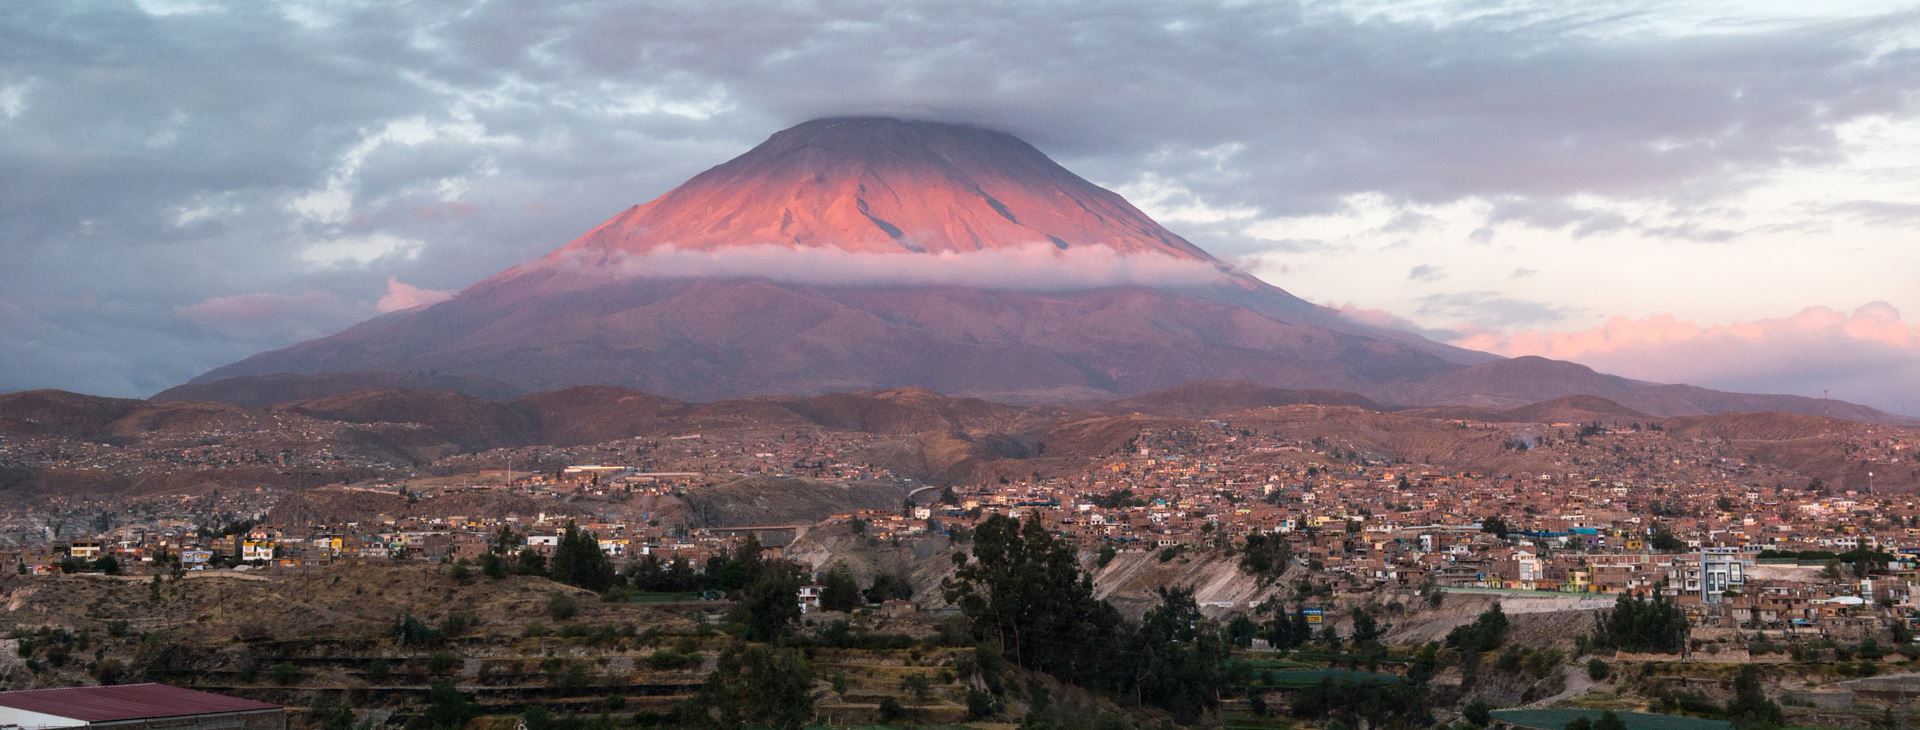 A volcano looking over a city